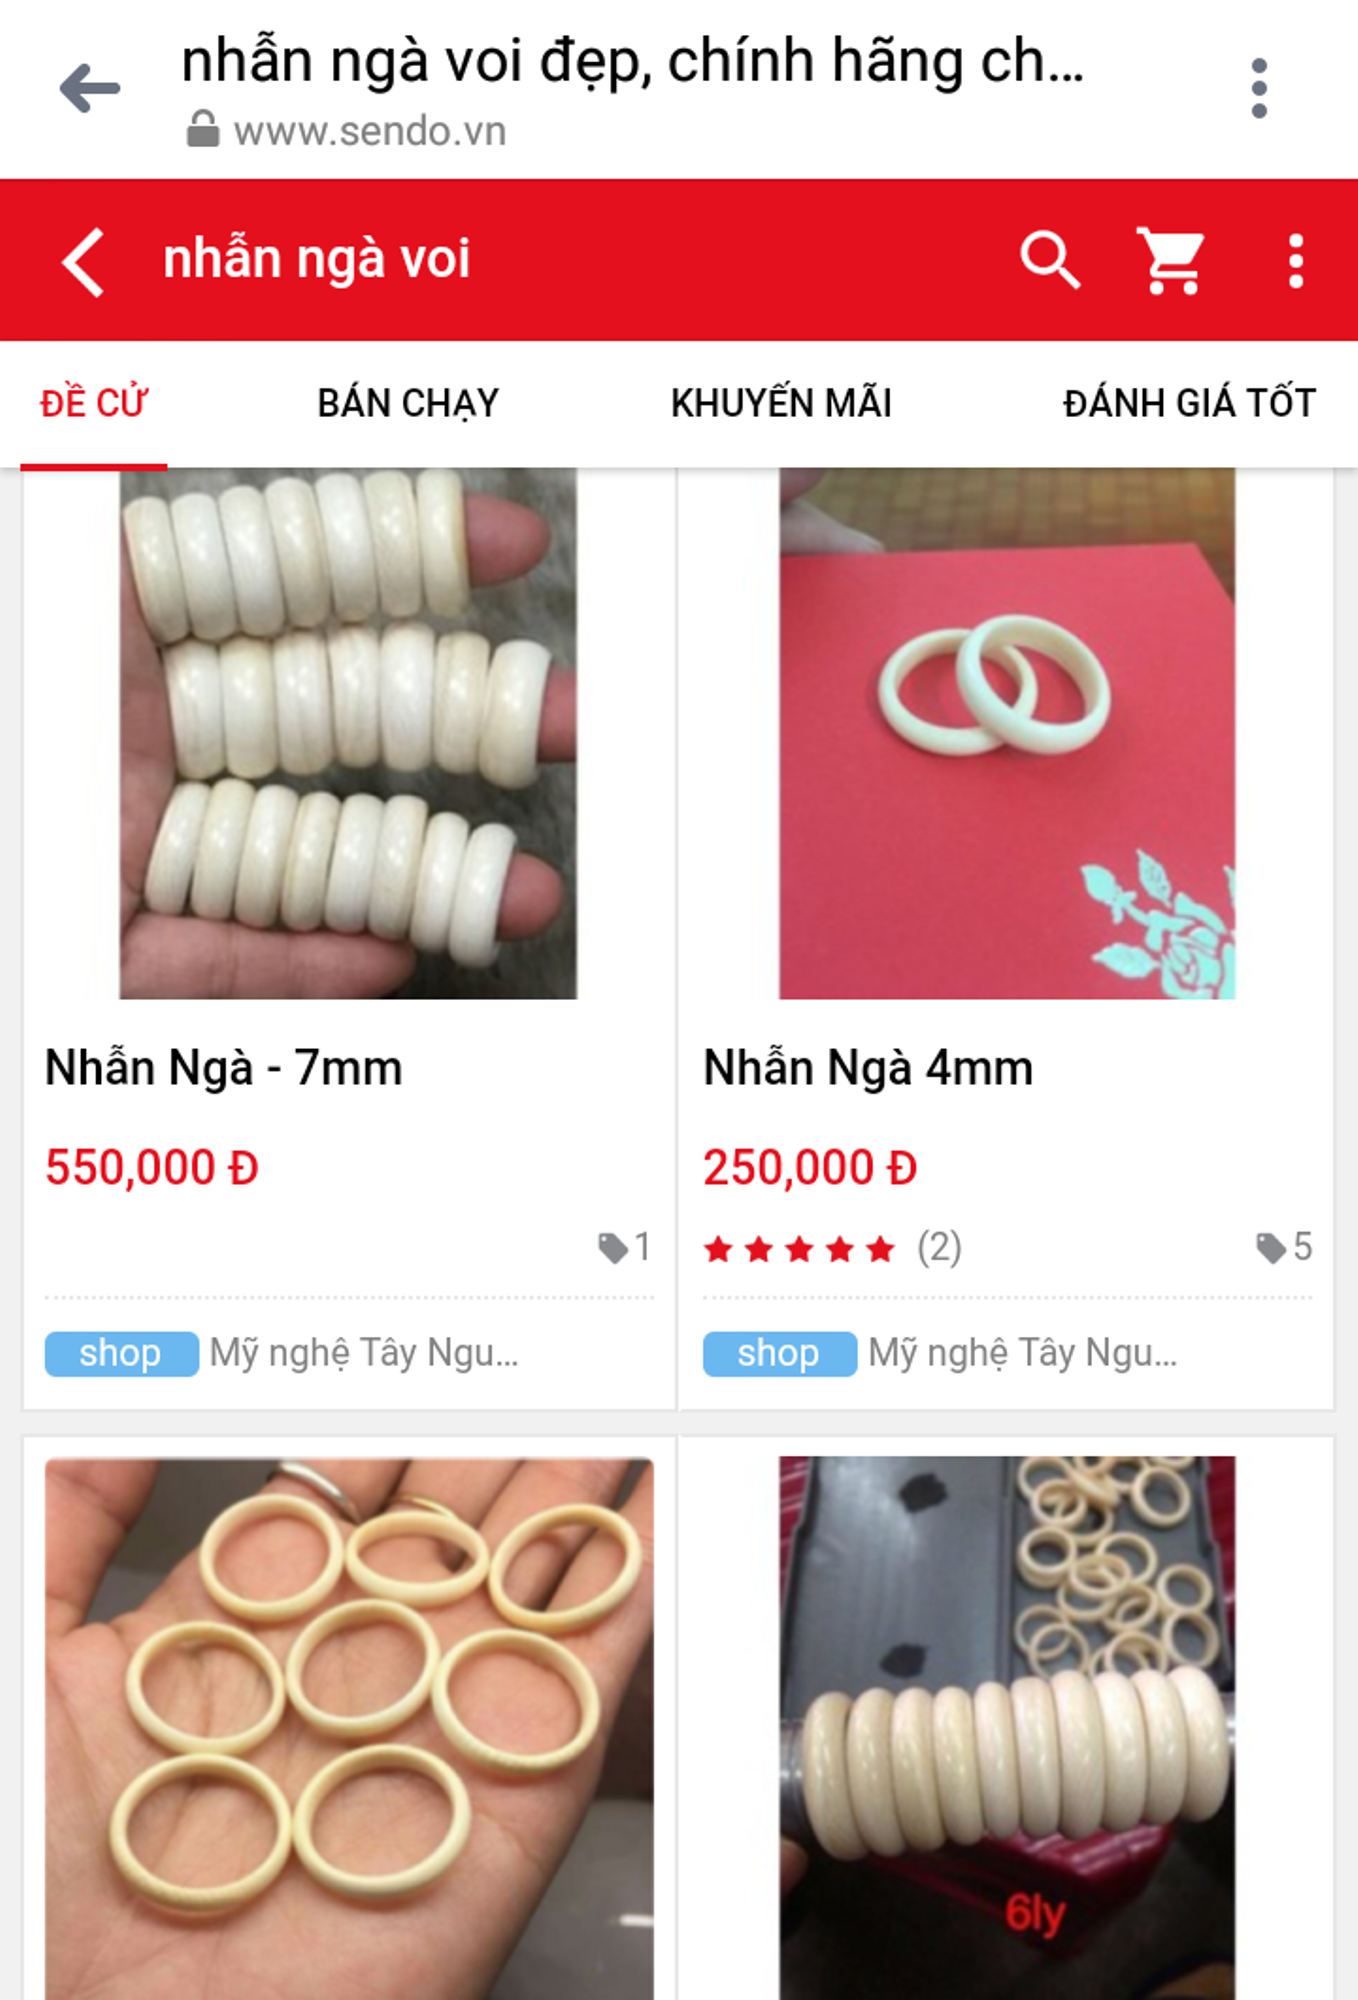 Ivory products are displayed publicly in social networks (Photo: Vietnam+)      